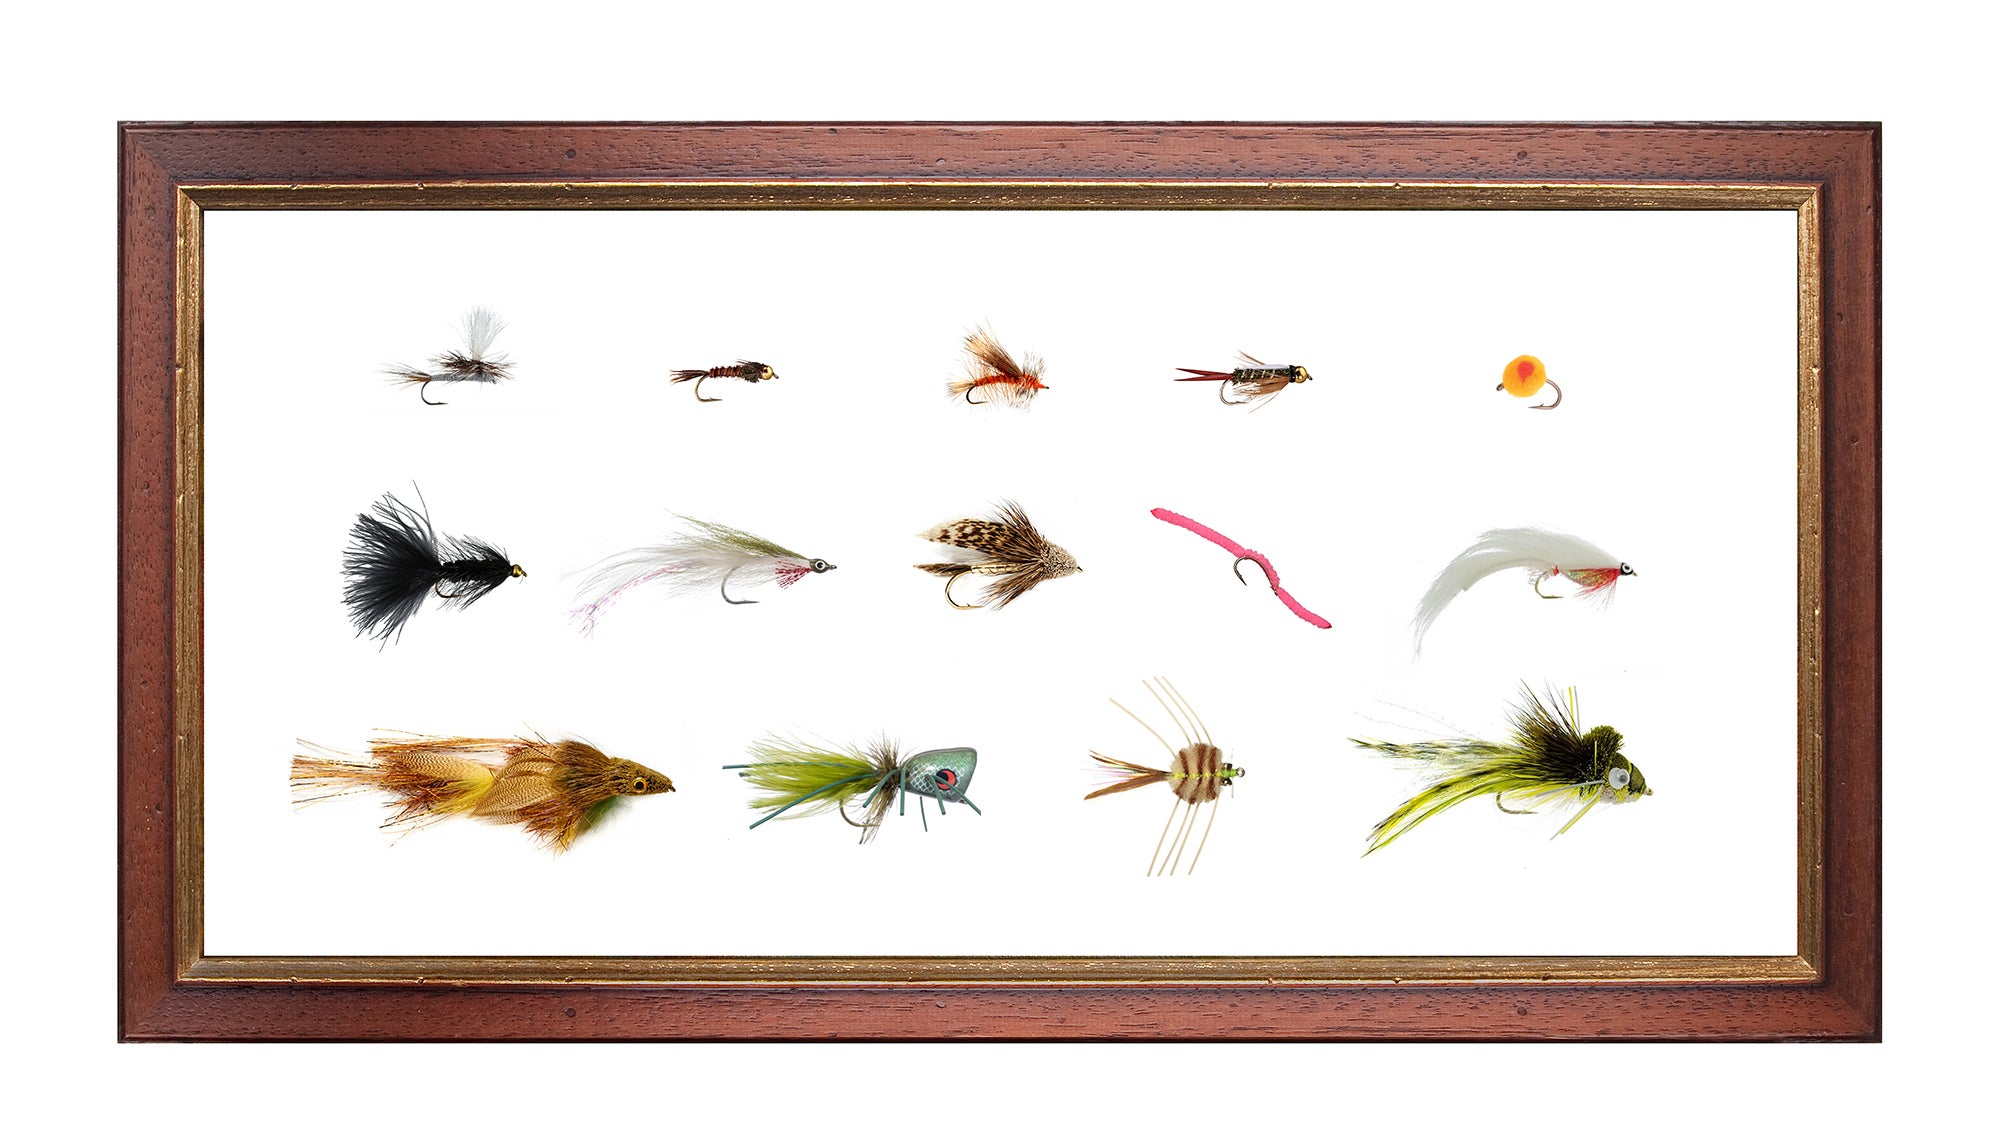 Best Trout Flies - 101 Proven Patterns - Fly Fishing Field Guides